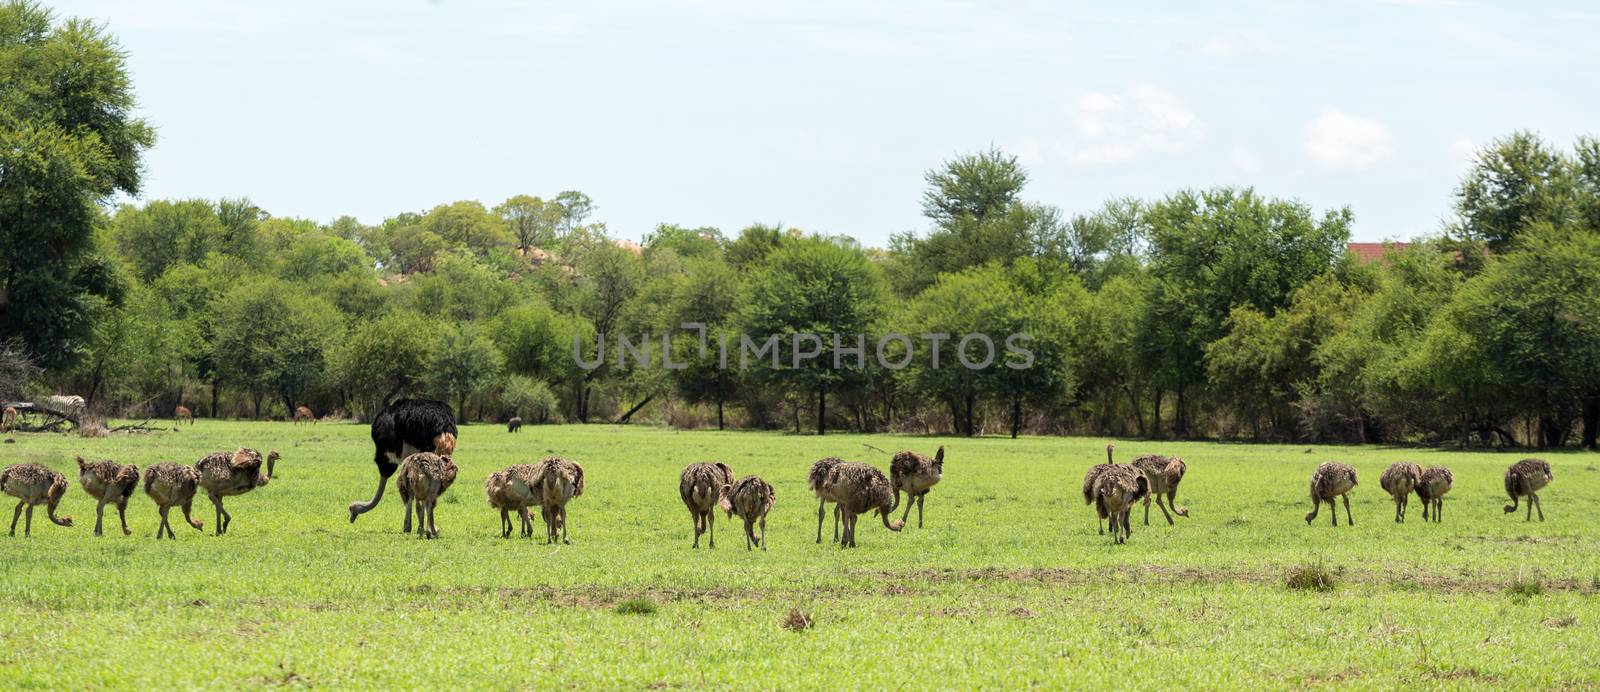 Ostriches grazing by derejeb